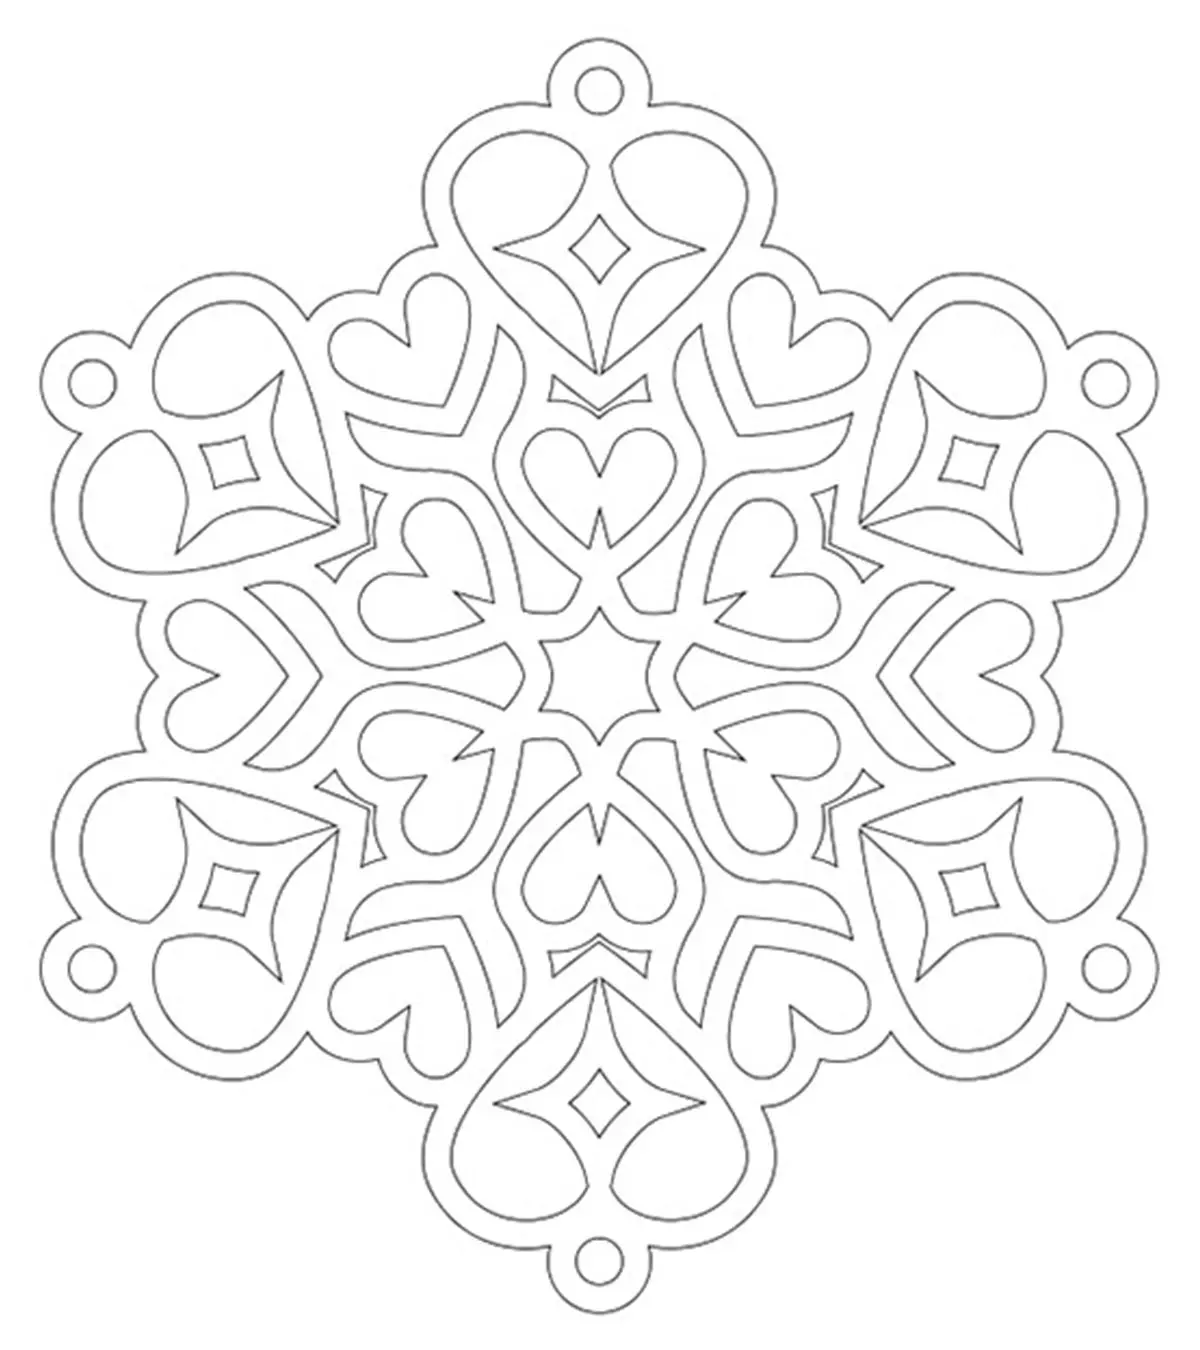 Top 20 Snowflake Coloring Pages For Your Little Ones